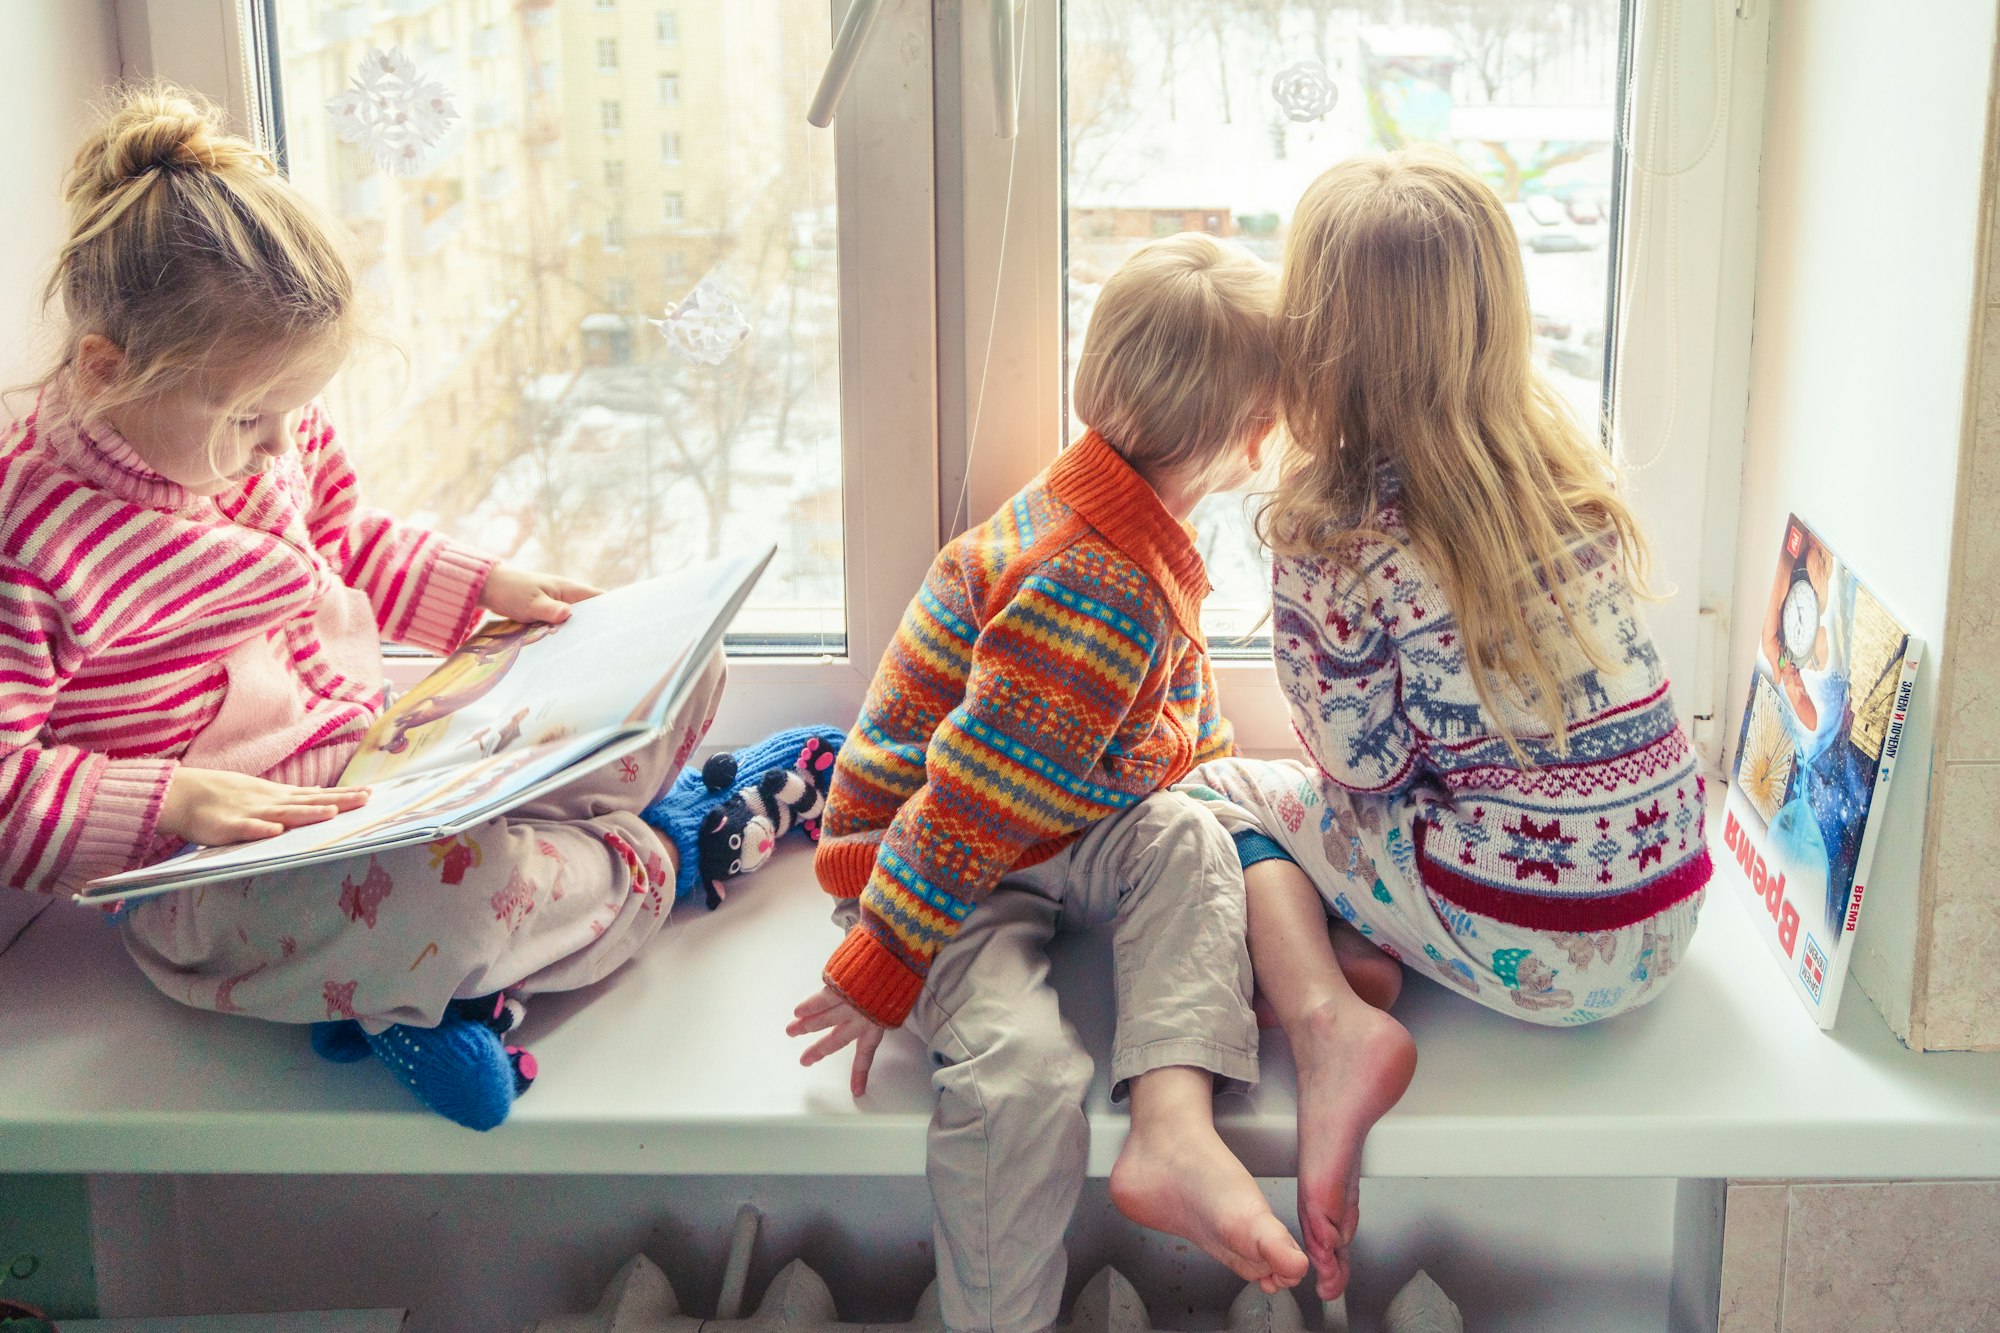 a group of children with blonde hair in knitted sweatshirts with northern patterns sit near the window, and it's winter outside